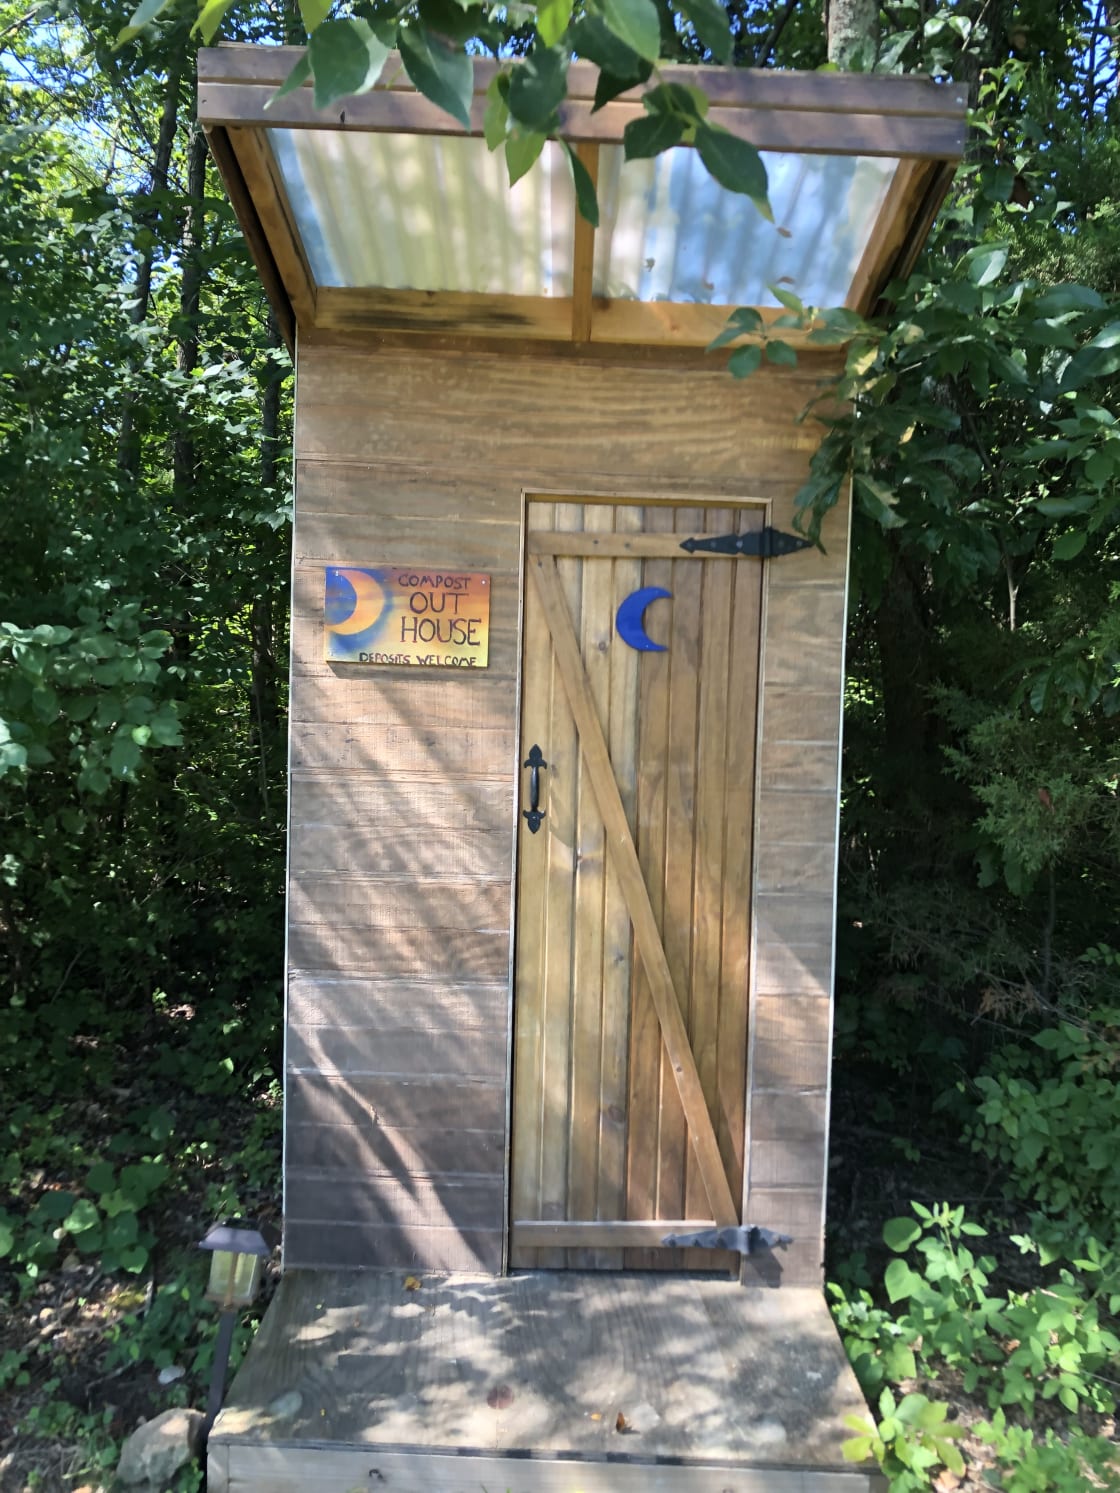 Amazing outhouse complete with lights and sawdust keeps it nice check it out!